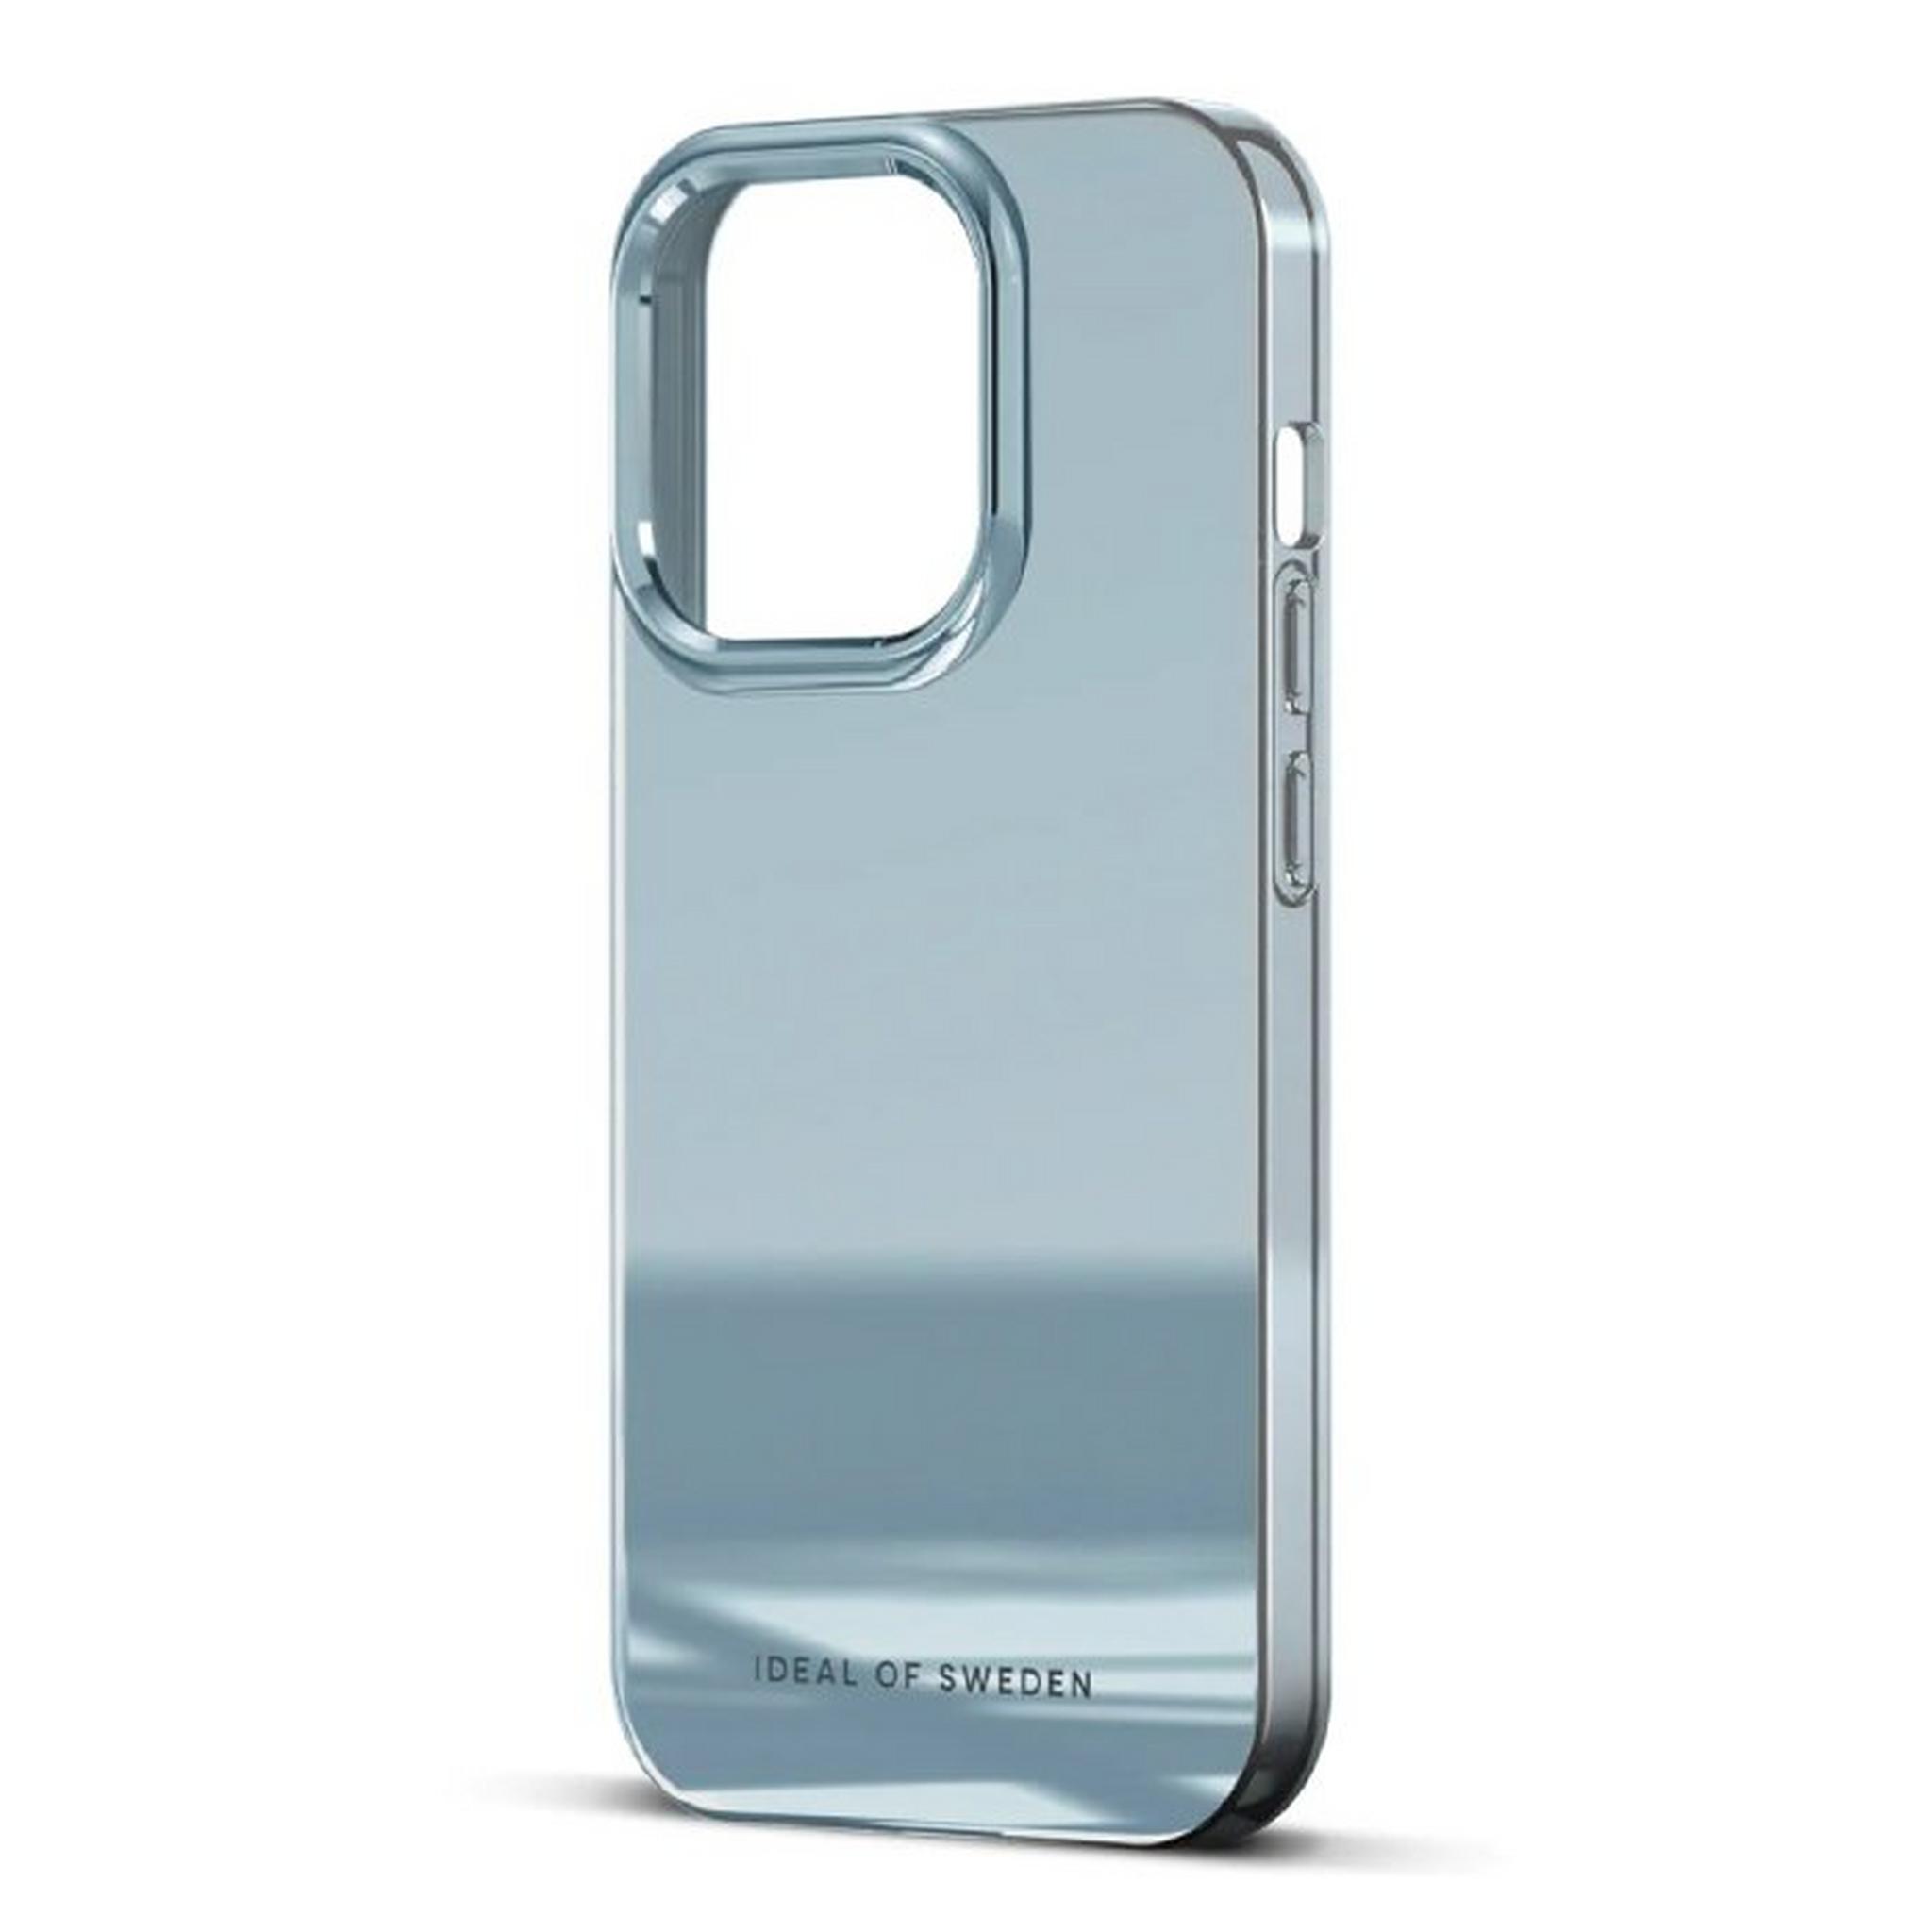 Ideal of Sweden Mirror Case for iPhone 15 Pro Max – Sky Blue